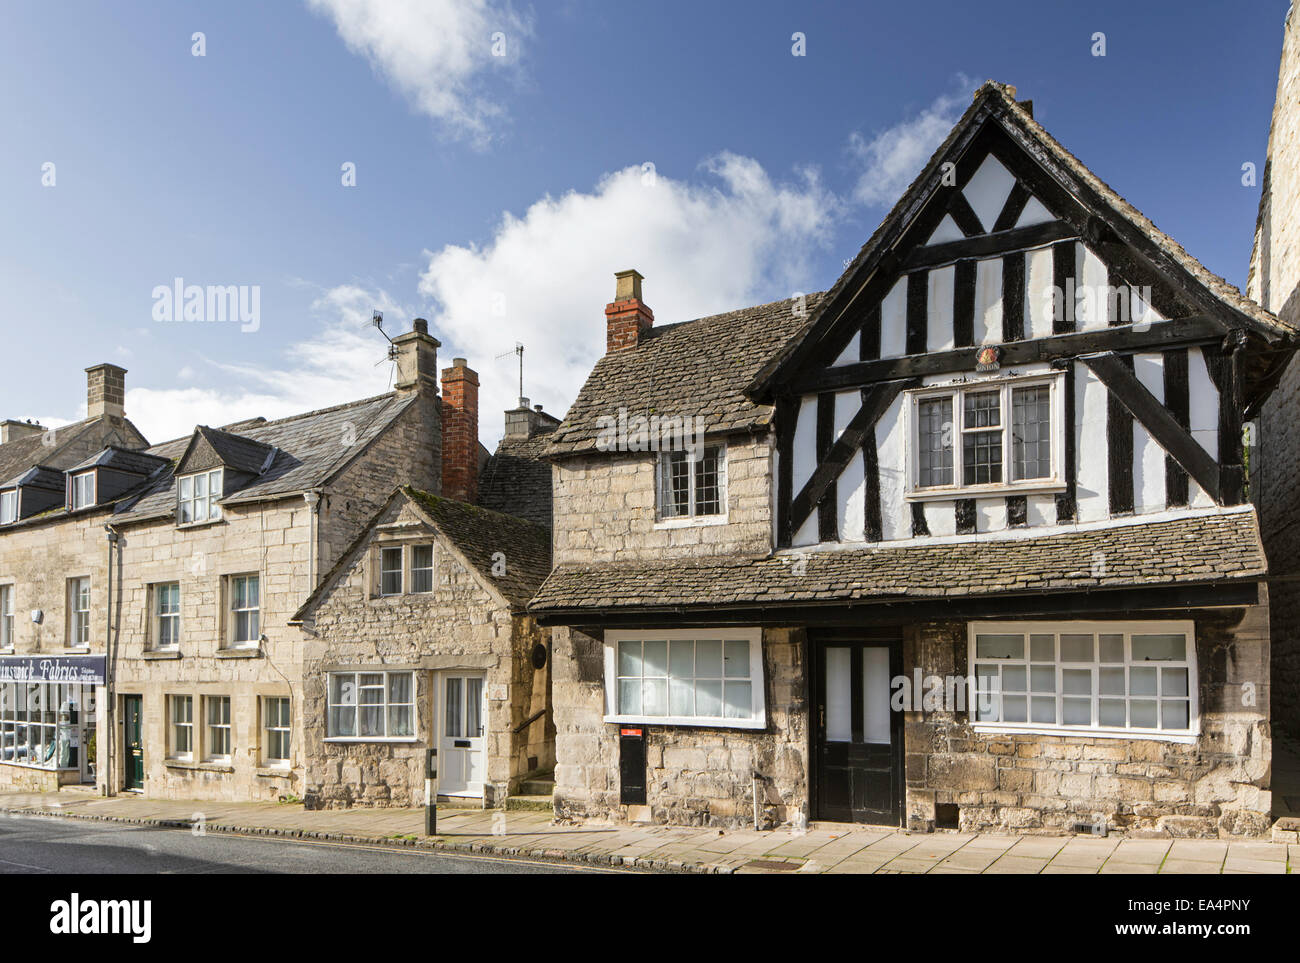 The old Post Office dating from 1428, Painswick, Gloucestershire, England, UK Stock Photo